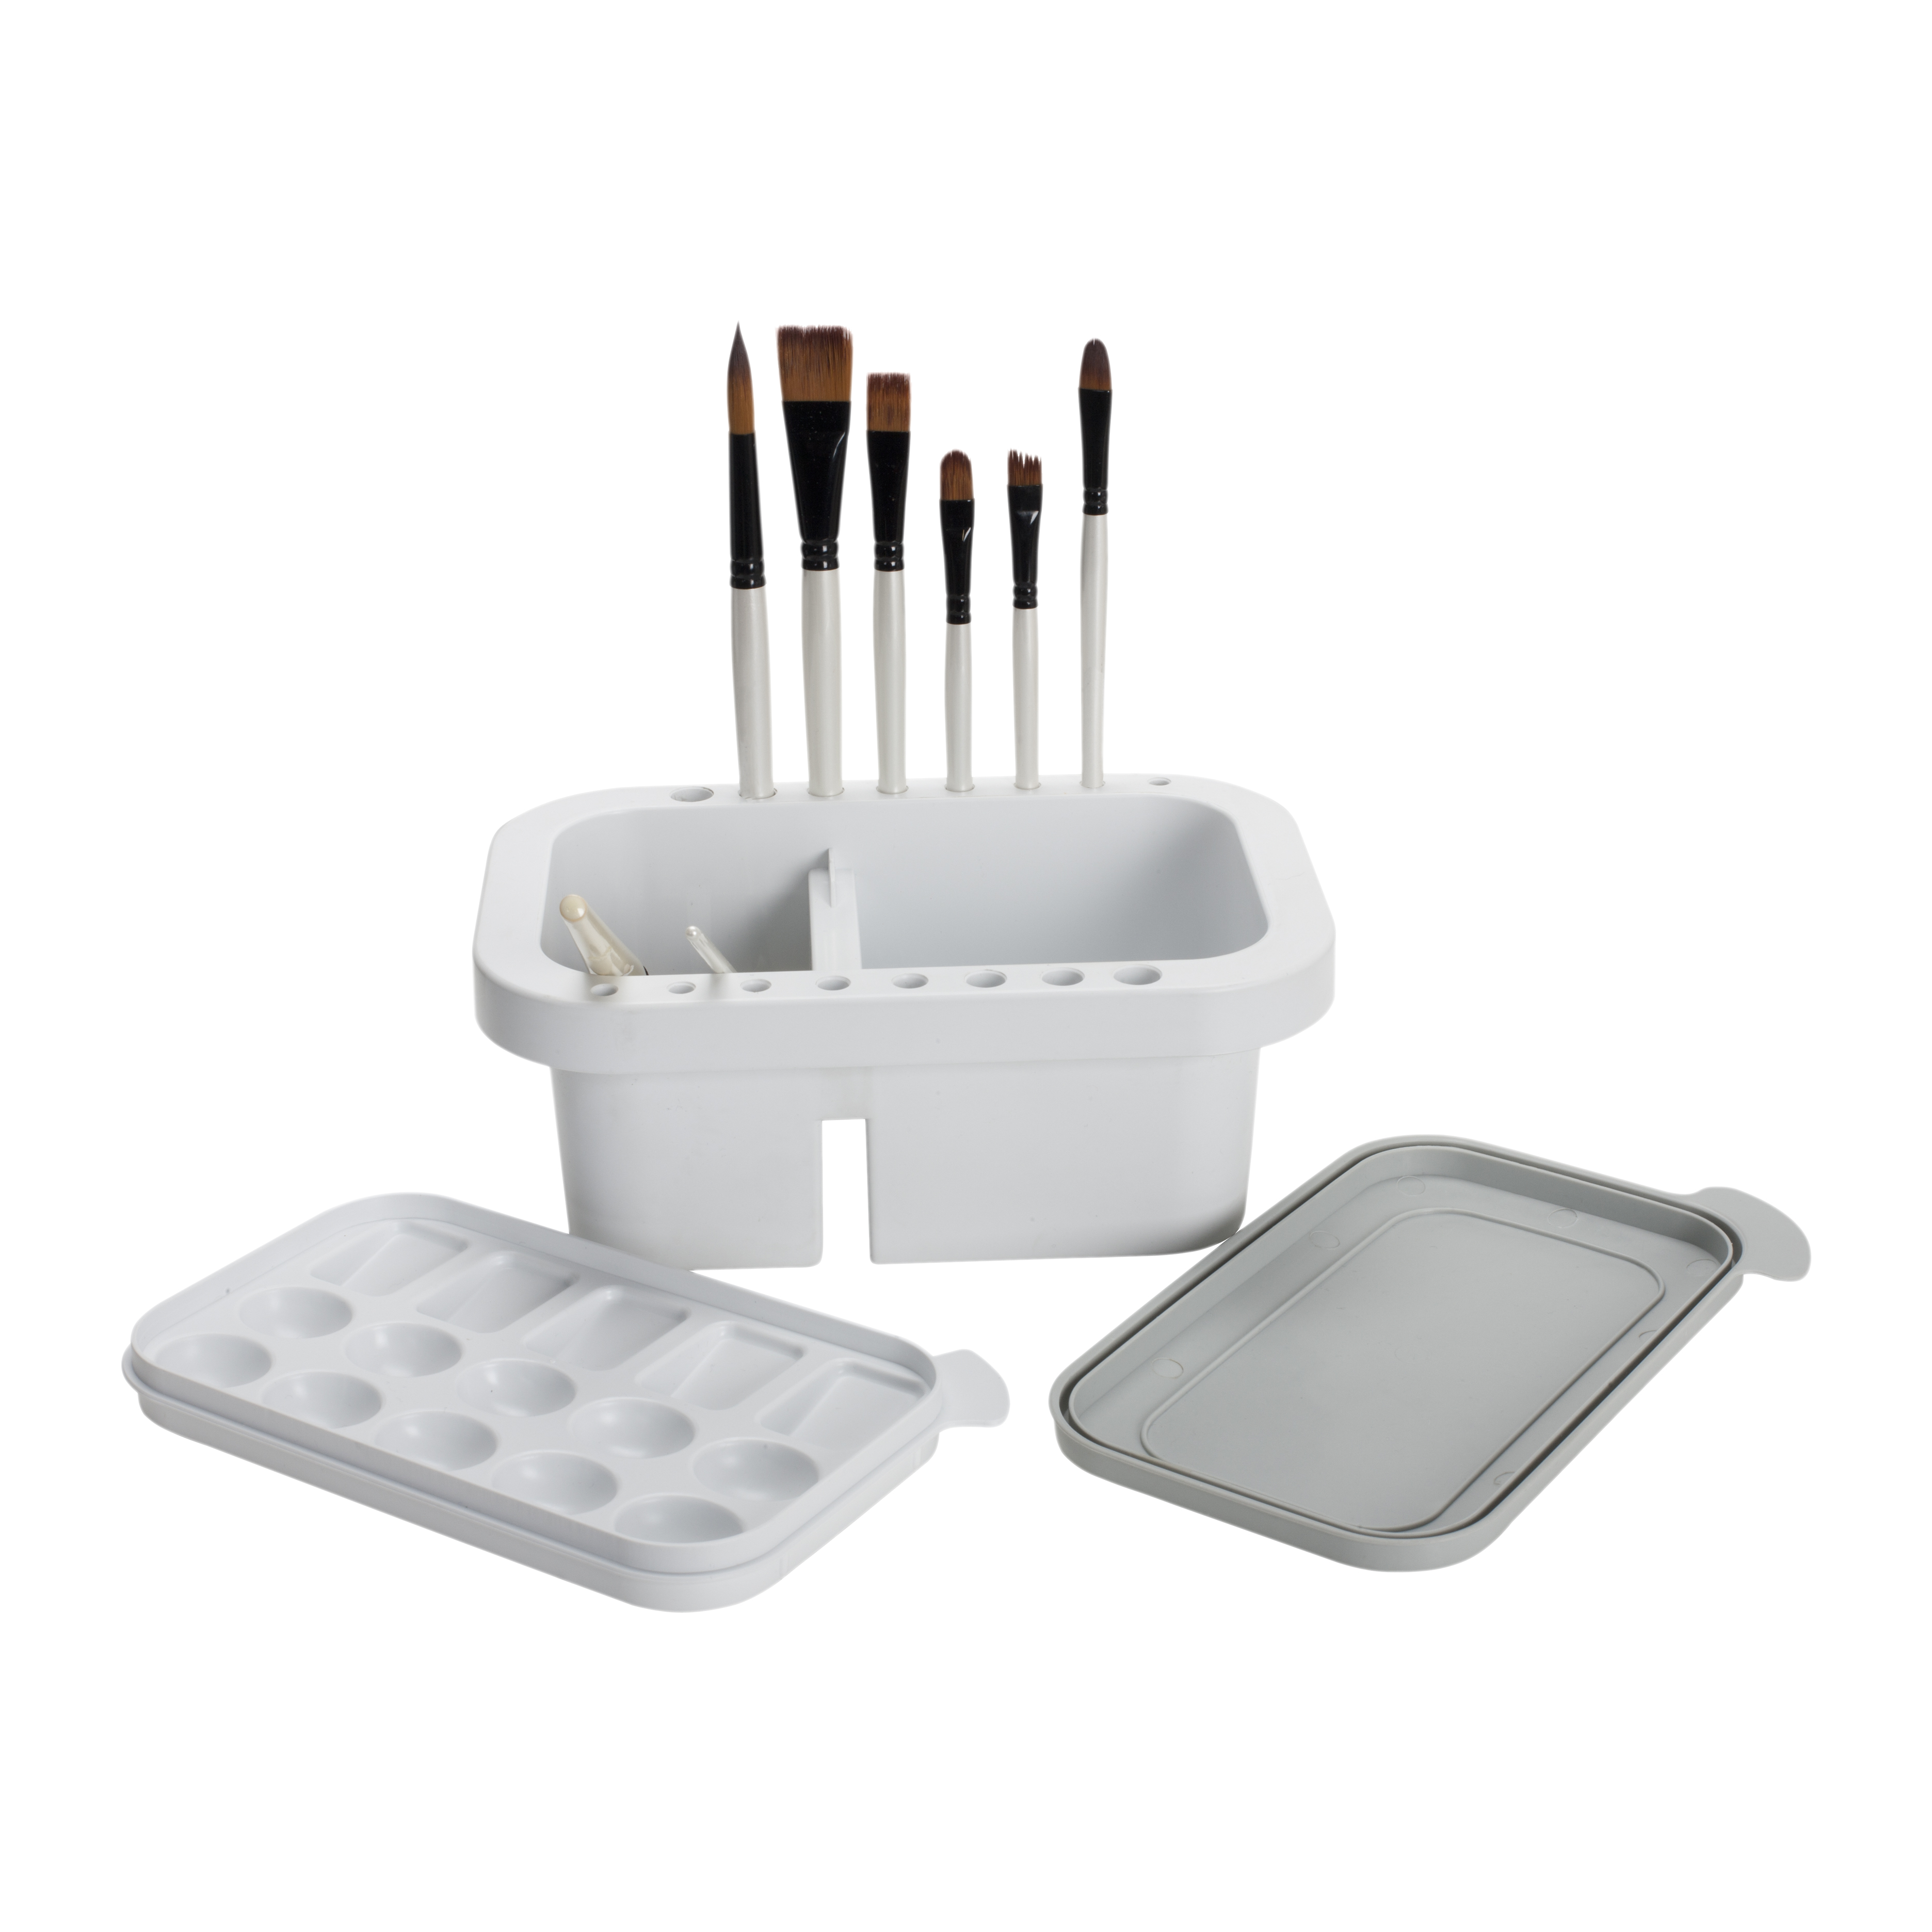 Jerry's Artarama Artist Brush Washer - Multi Use Include Paint Brush Stand & Rest, Cleaning & Washing Basin, Water Bucket, and Painting Palette All